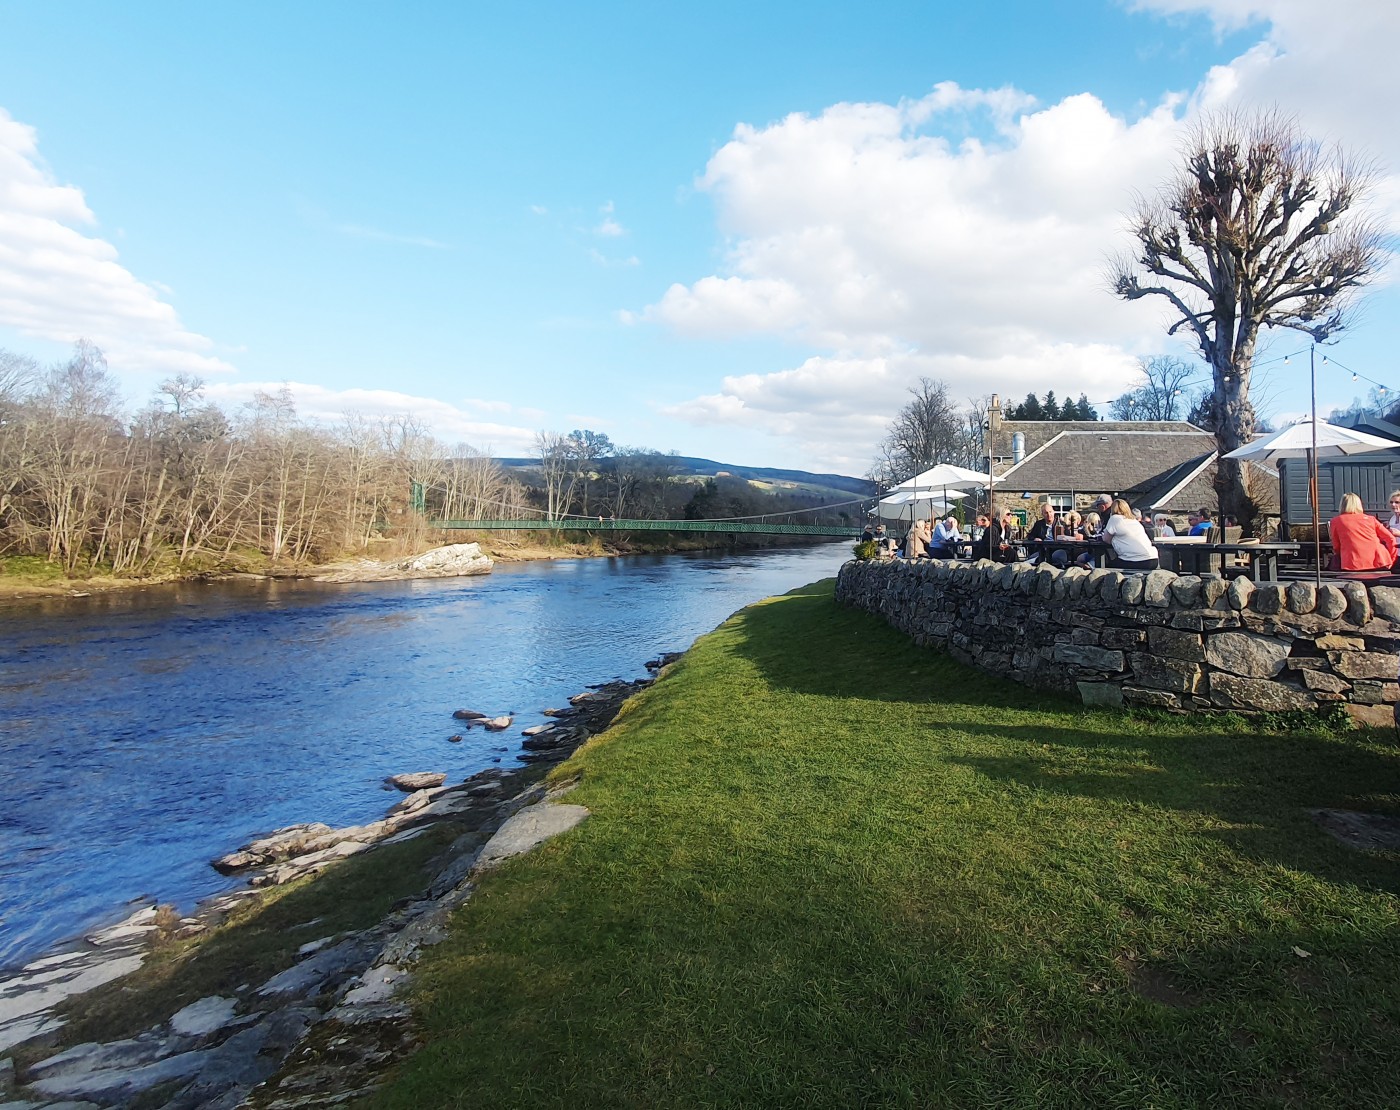 Restaurants for a more formal menu in Pitlochry